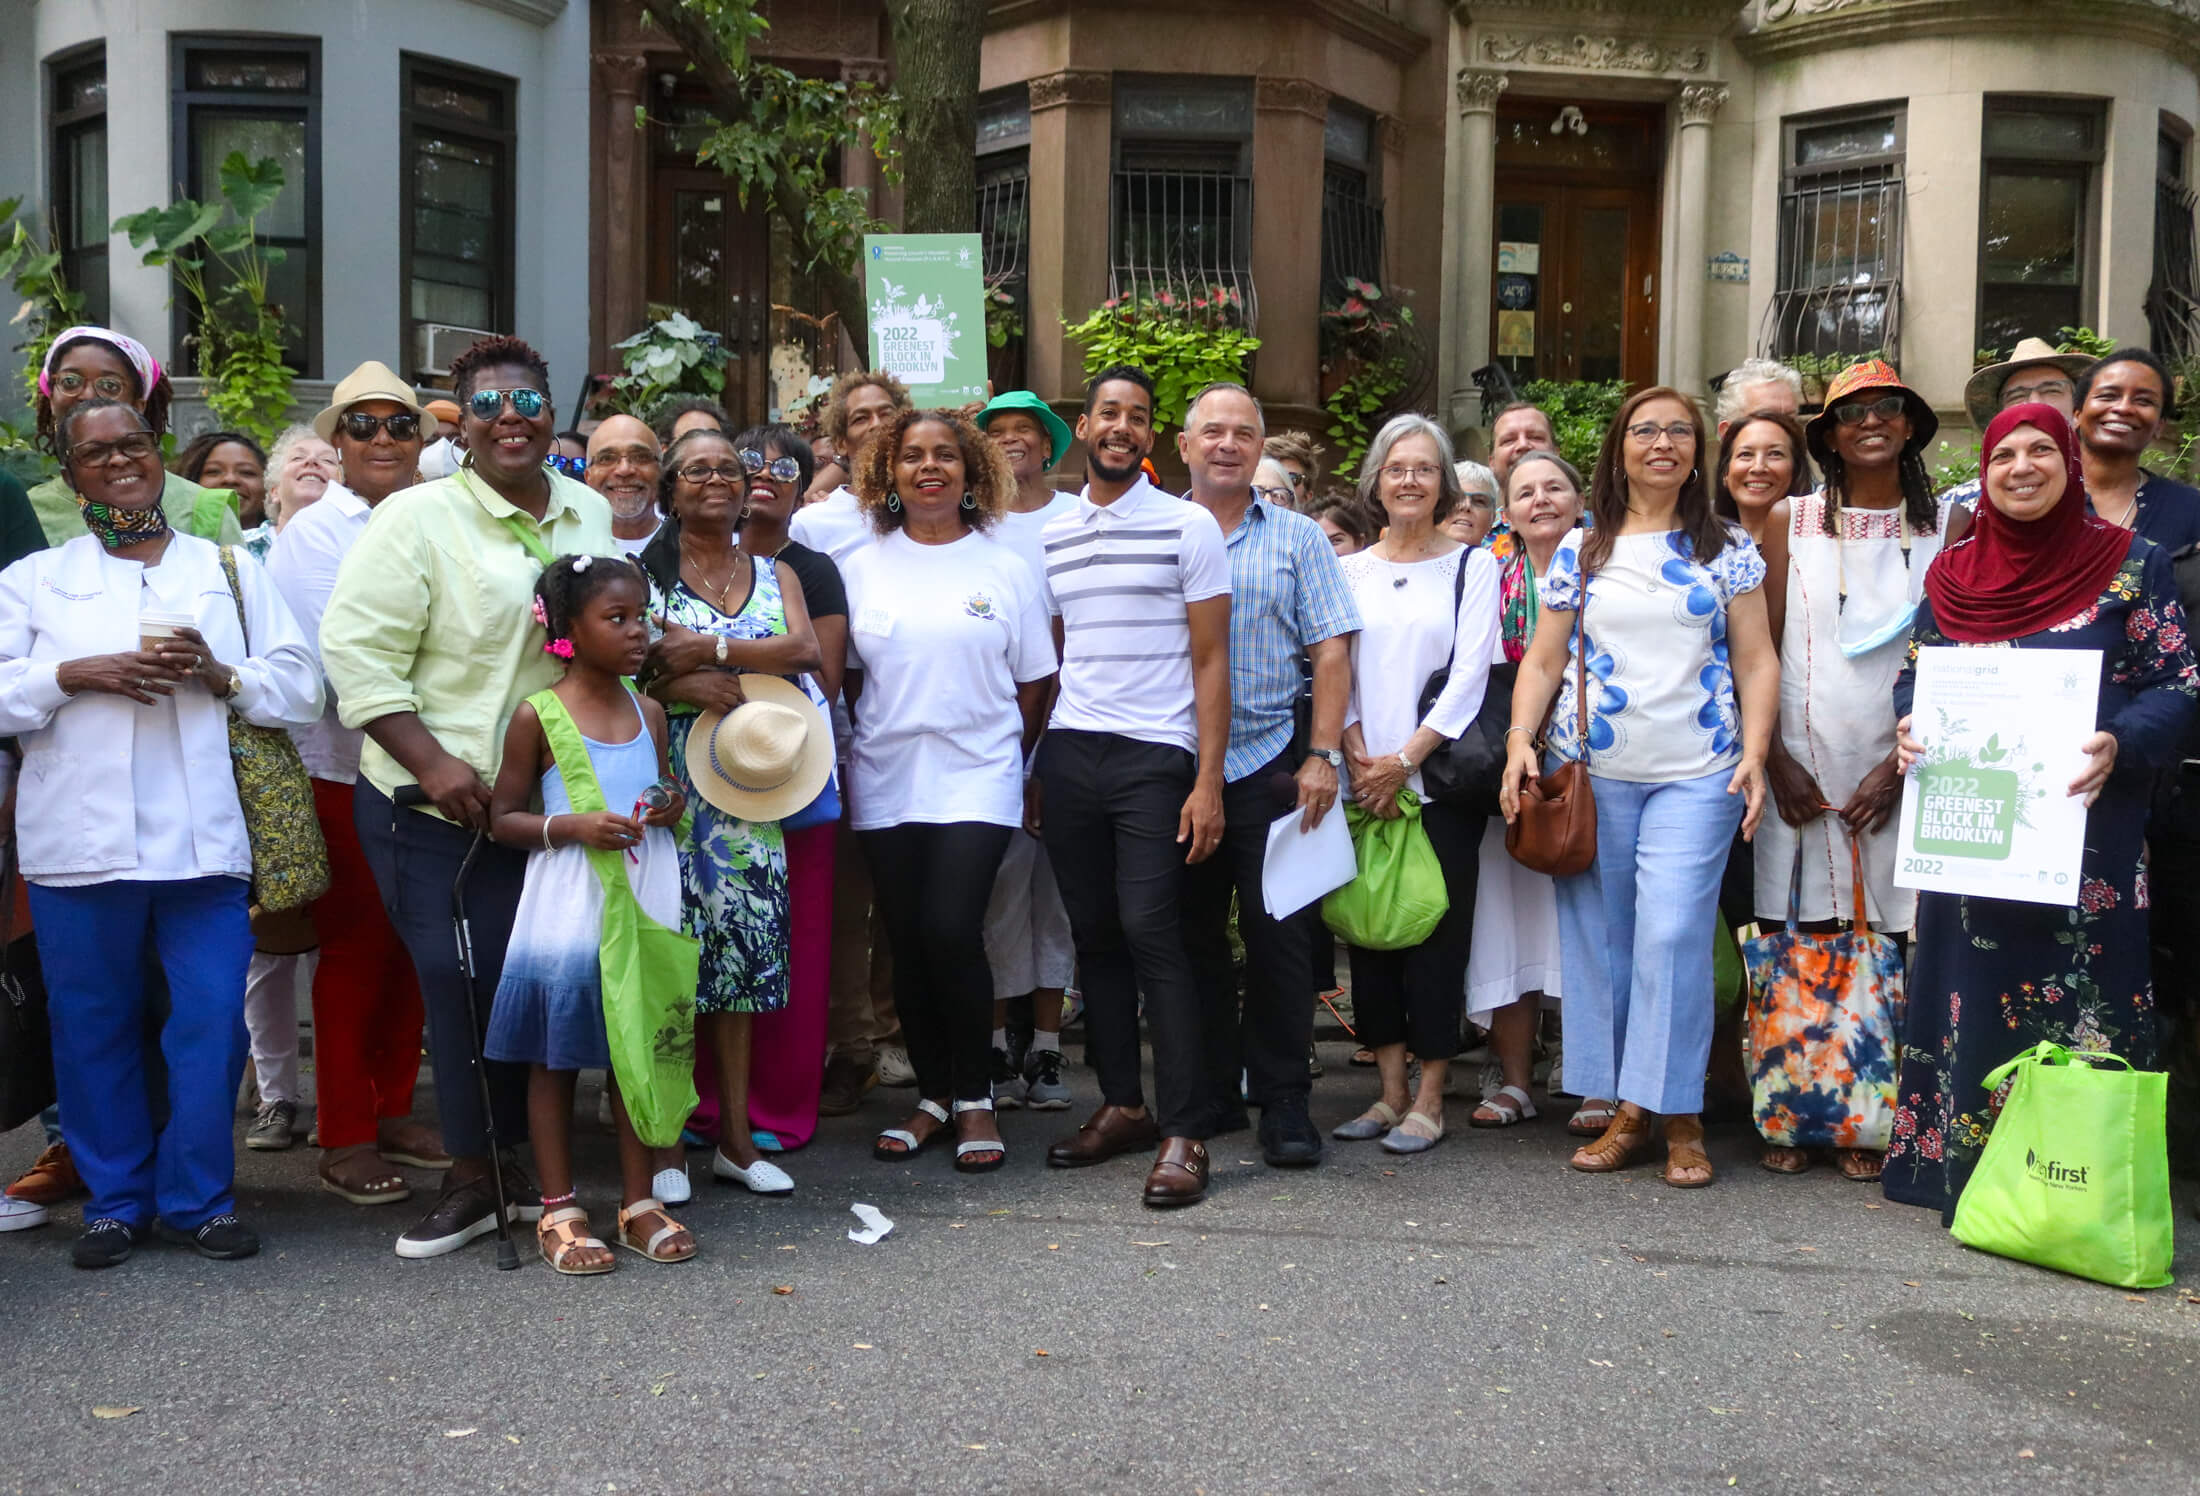 Crown Heights Block on Lincoln Place Takes Top Prize in Greenest Block in Brooklyn Contest